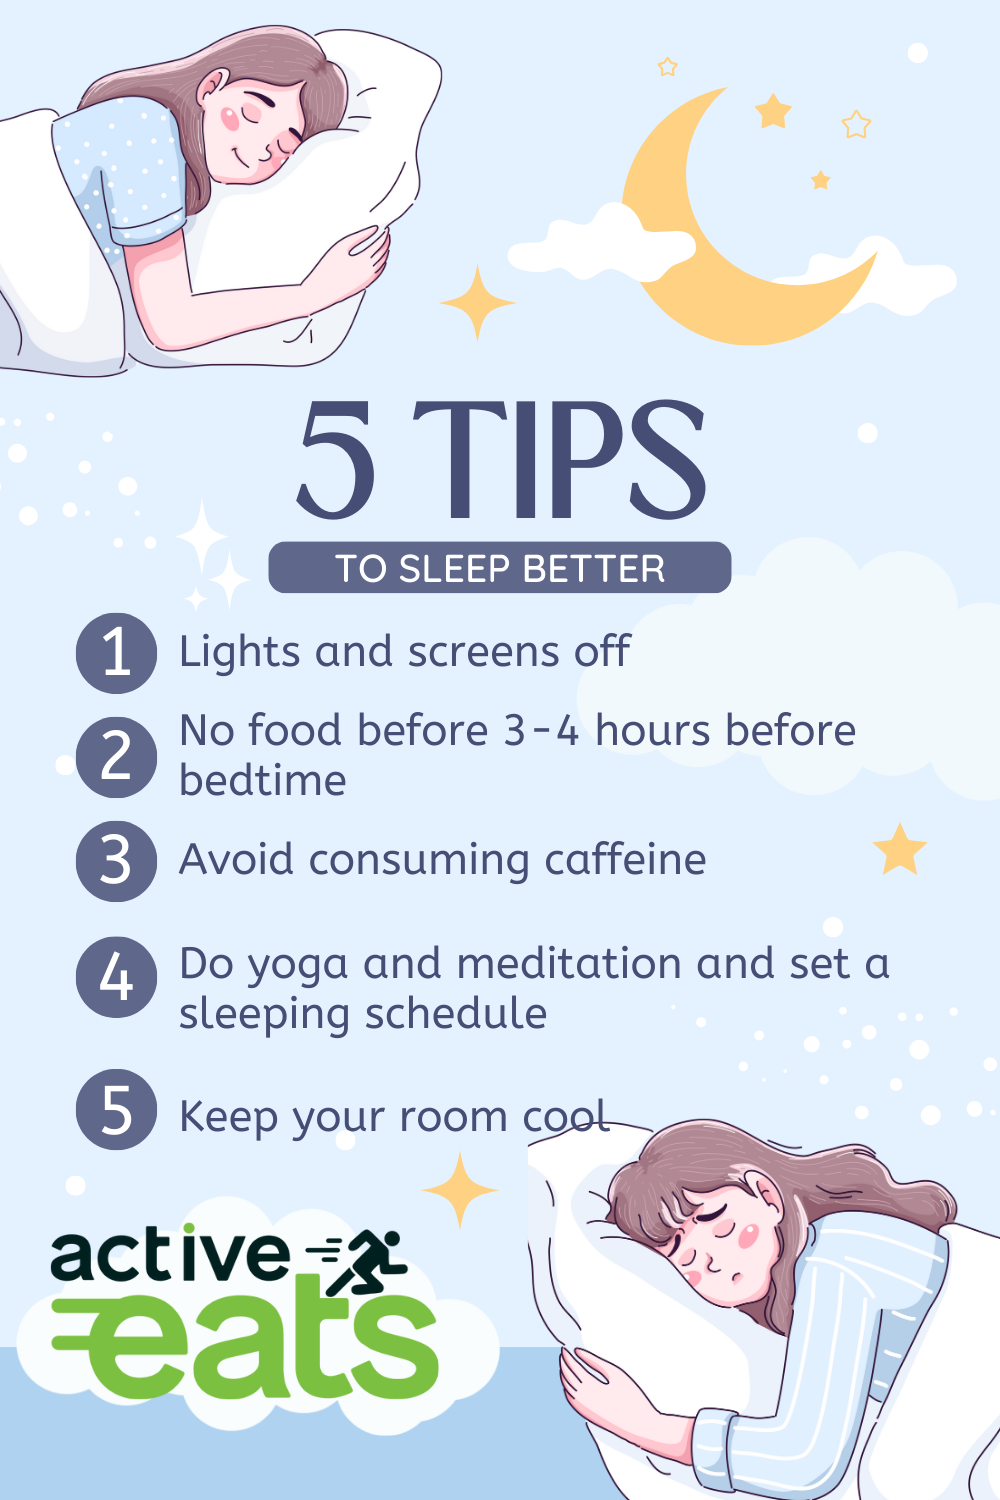 Some tips to sleep better are: Maintain a consistent sleep schedule. Create a comfortable sleep environment. Limit caffeine and alcohol intake, especially before bedtime. Engage in relaxation techniques like deep breathing. Avoid screens before bed. Get regular exercise. Manage stress through mindfulness or meditation. Limit large meals close to bedtime. Avoid daytime naps. Seek medical help for persistent sleep issues.